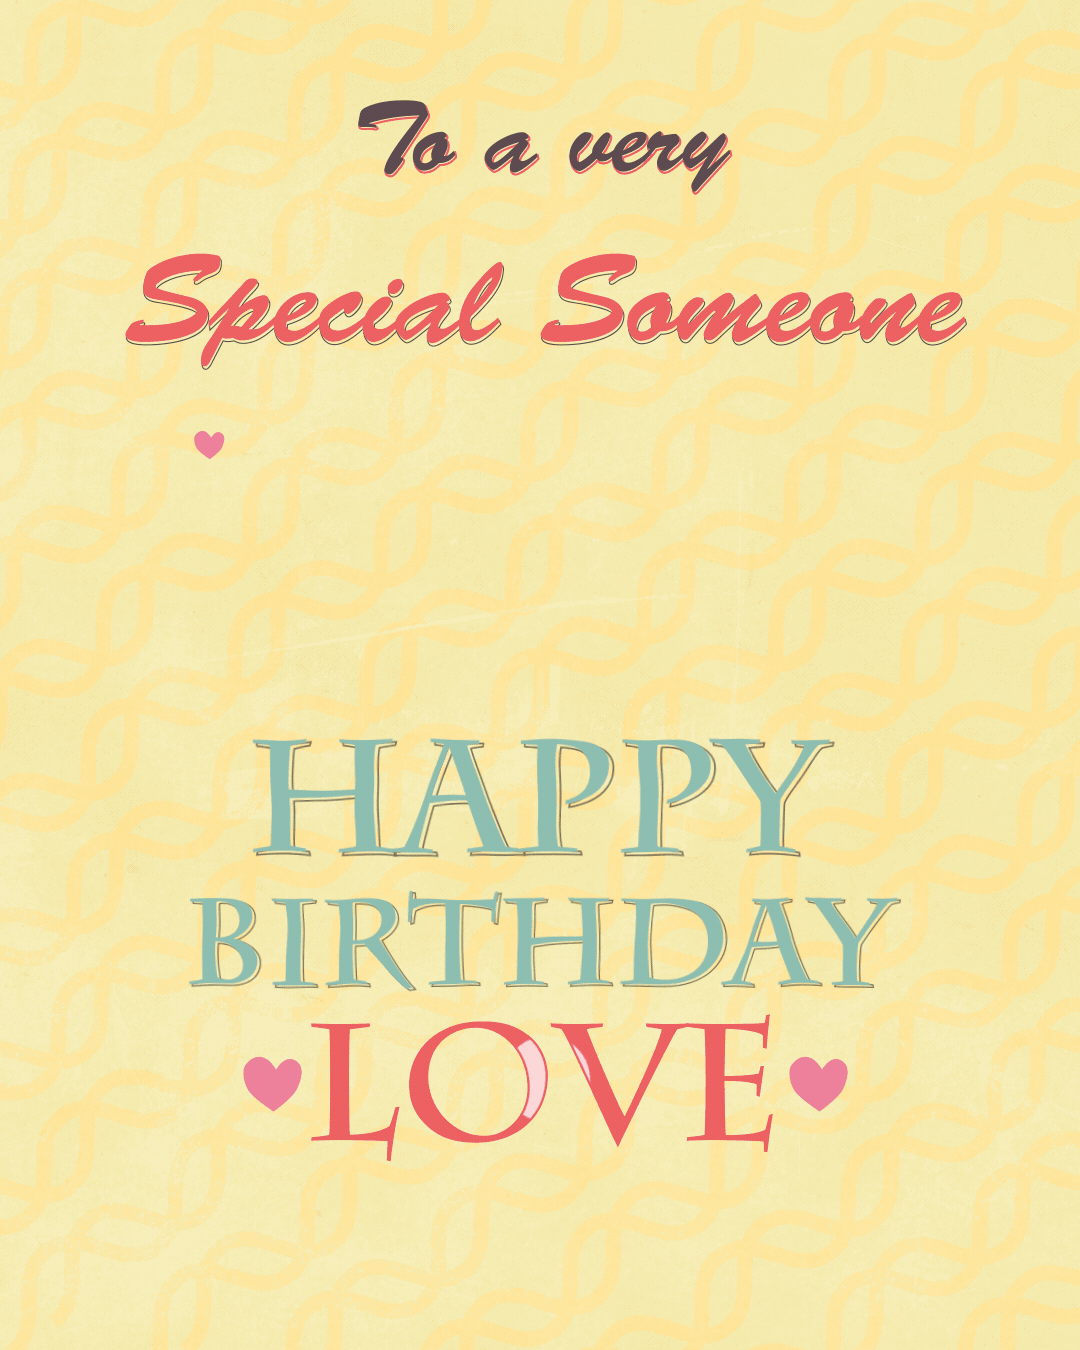 Free Happy Birthday Animated Images and GIFs for Boyfriend ...